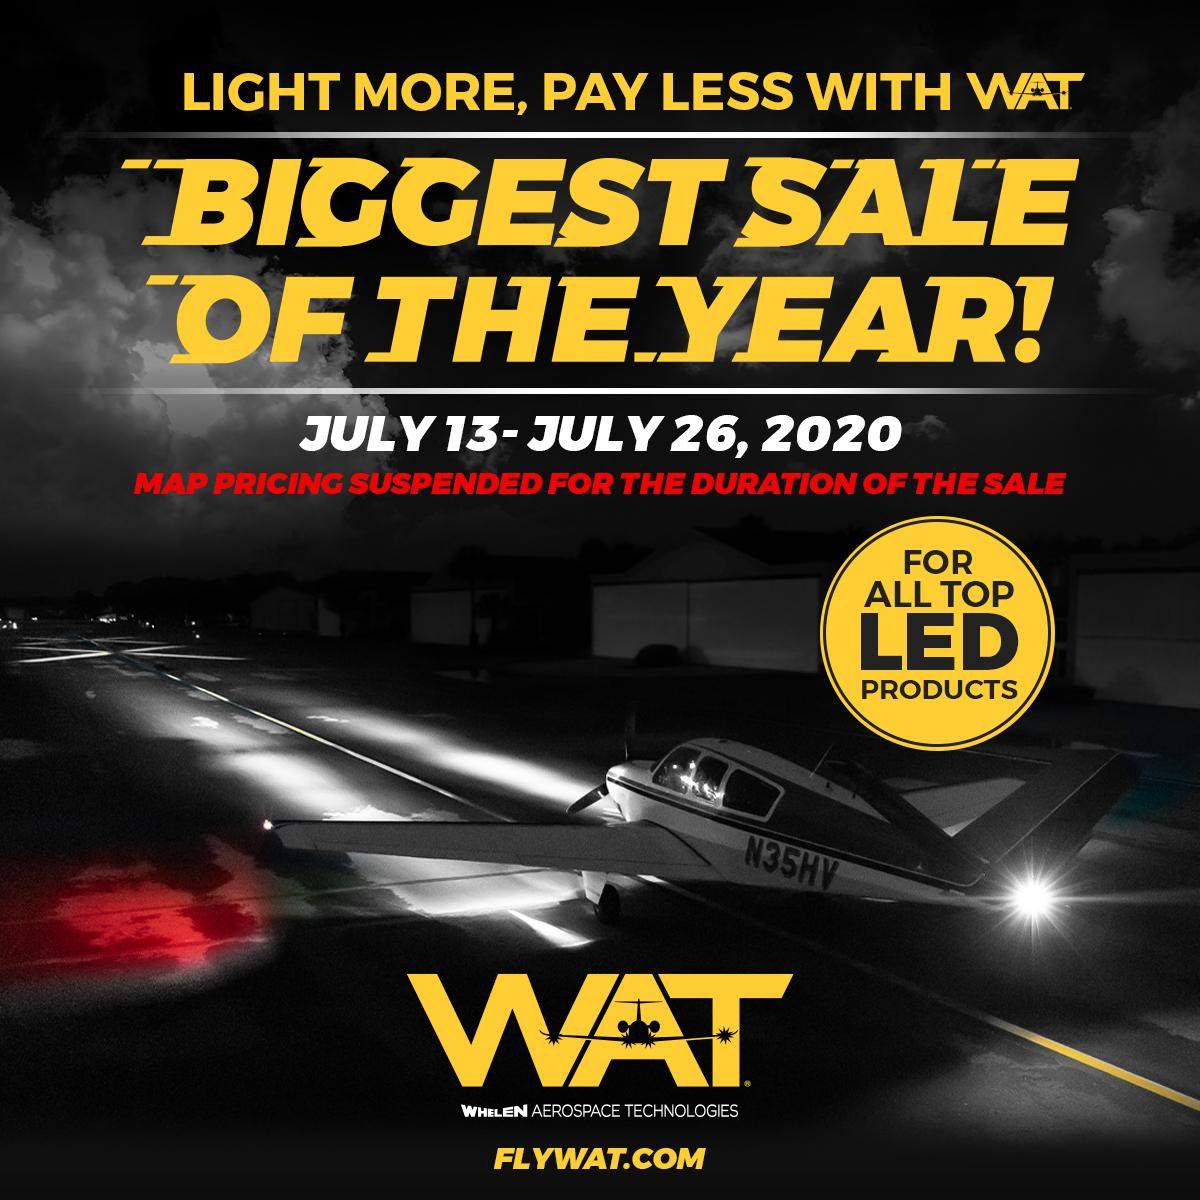 FS: WAT LED/HID Summer Promotion! 10% Off LED Lighting - Avionics / Parts  Classifieds -  - A community for Mooney aircraft owners and  enthusiasts